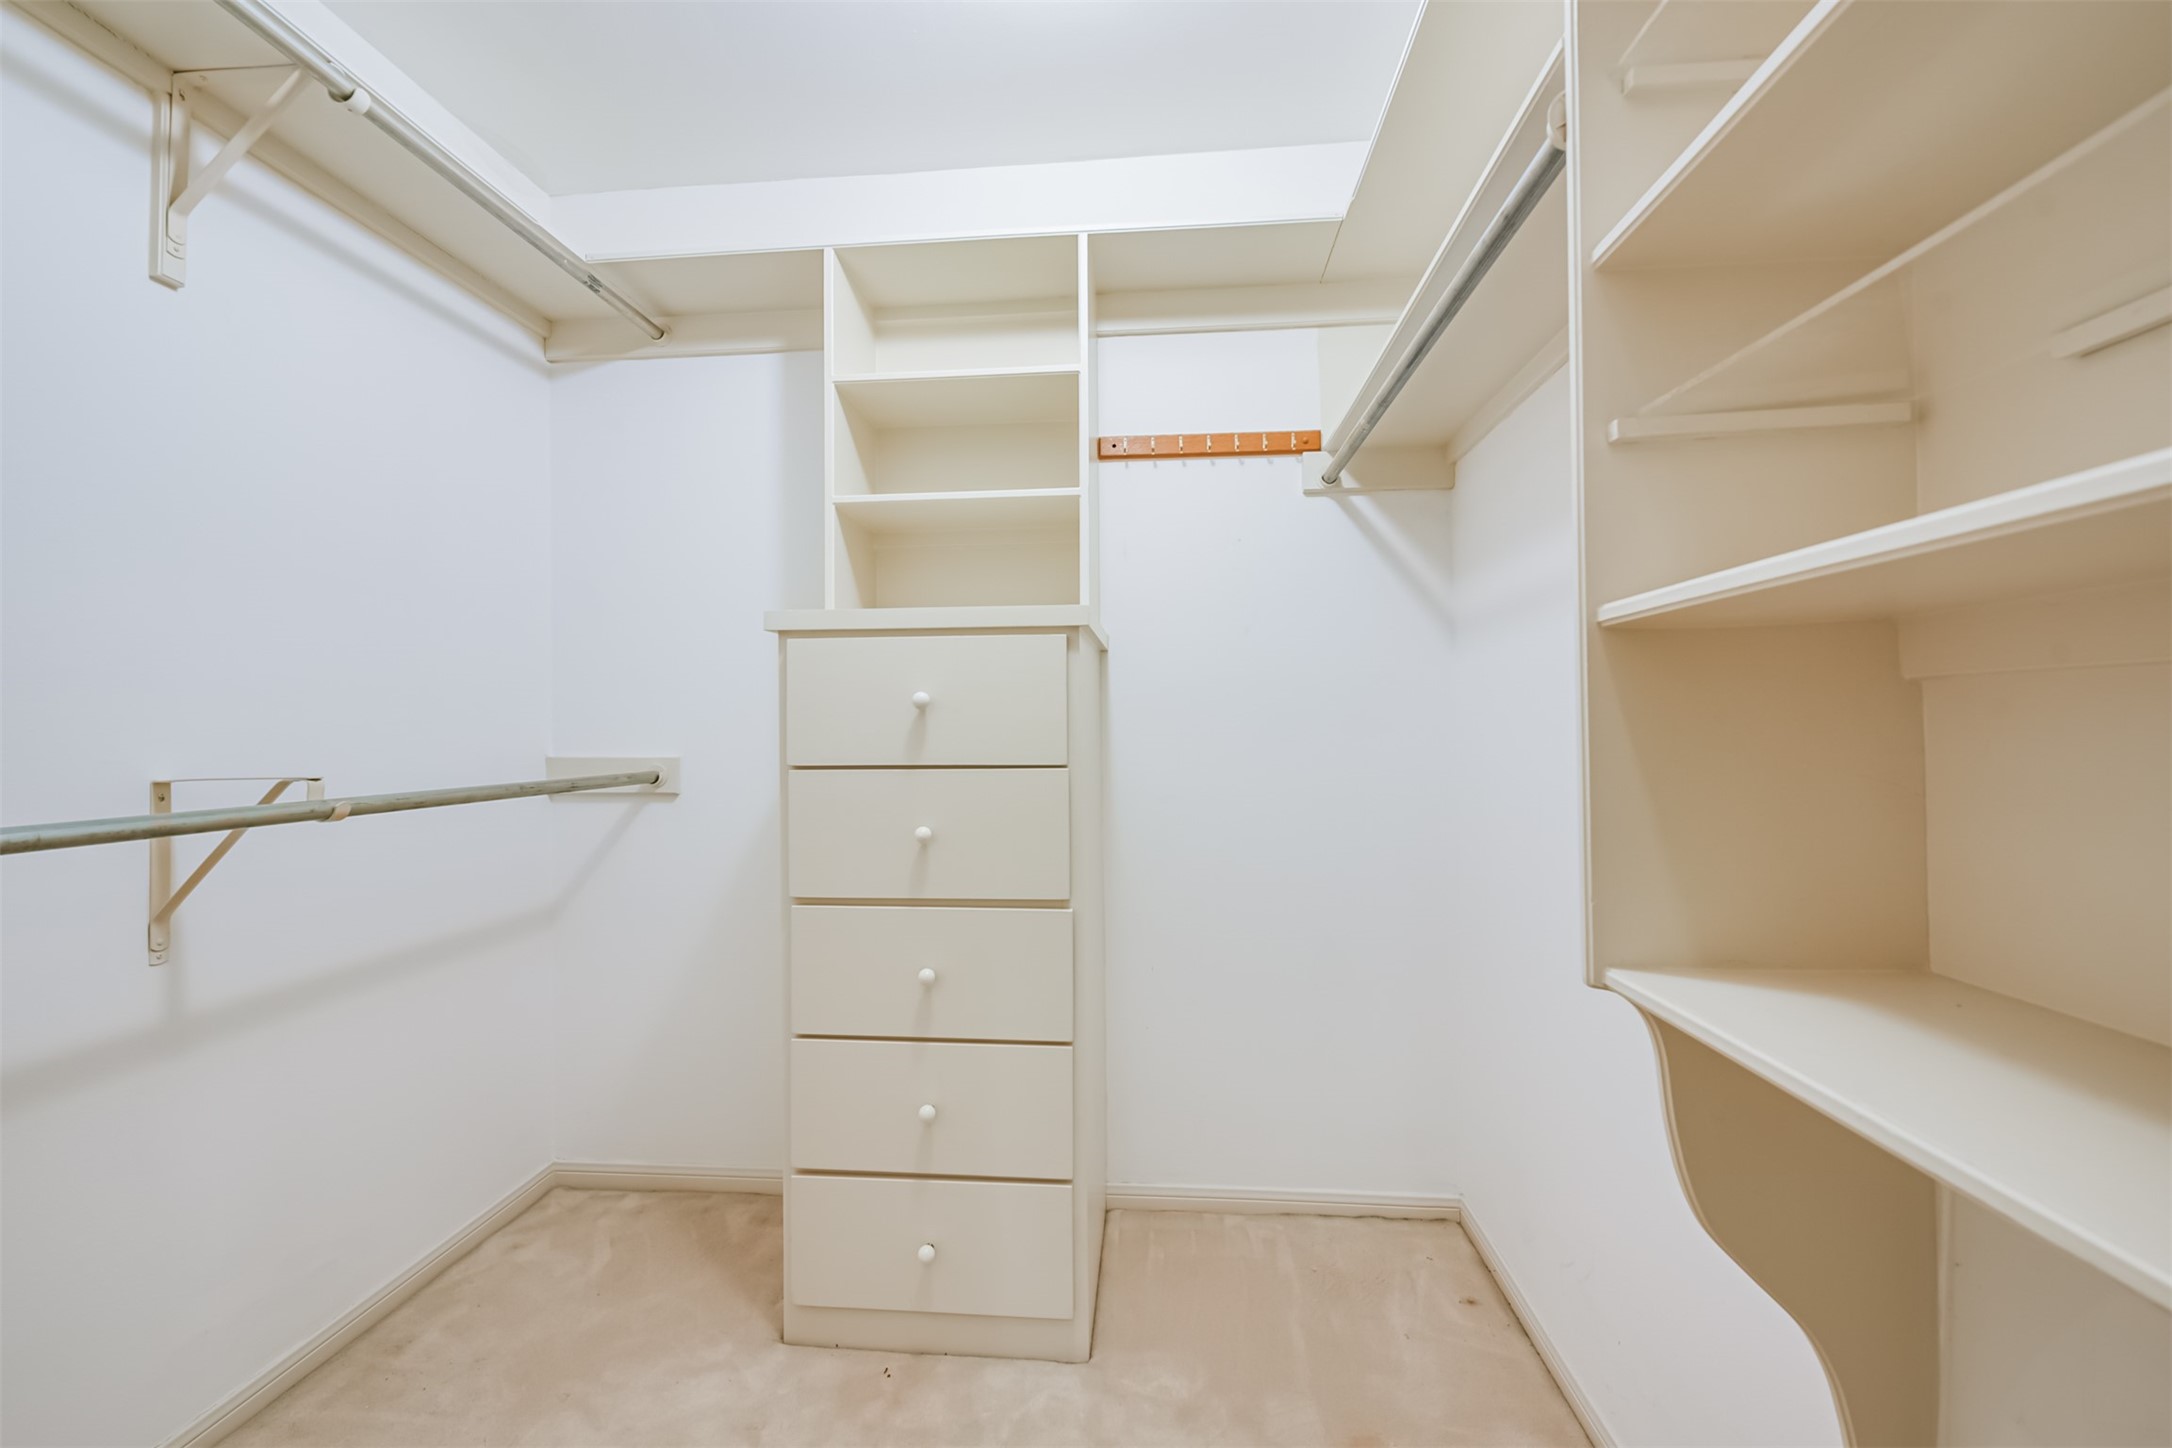 One of two identically sized walk-in closets within the Primary bath space.